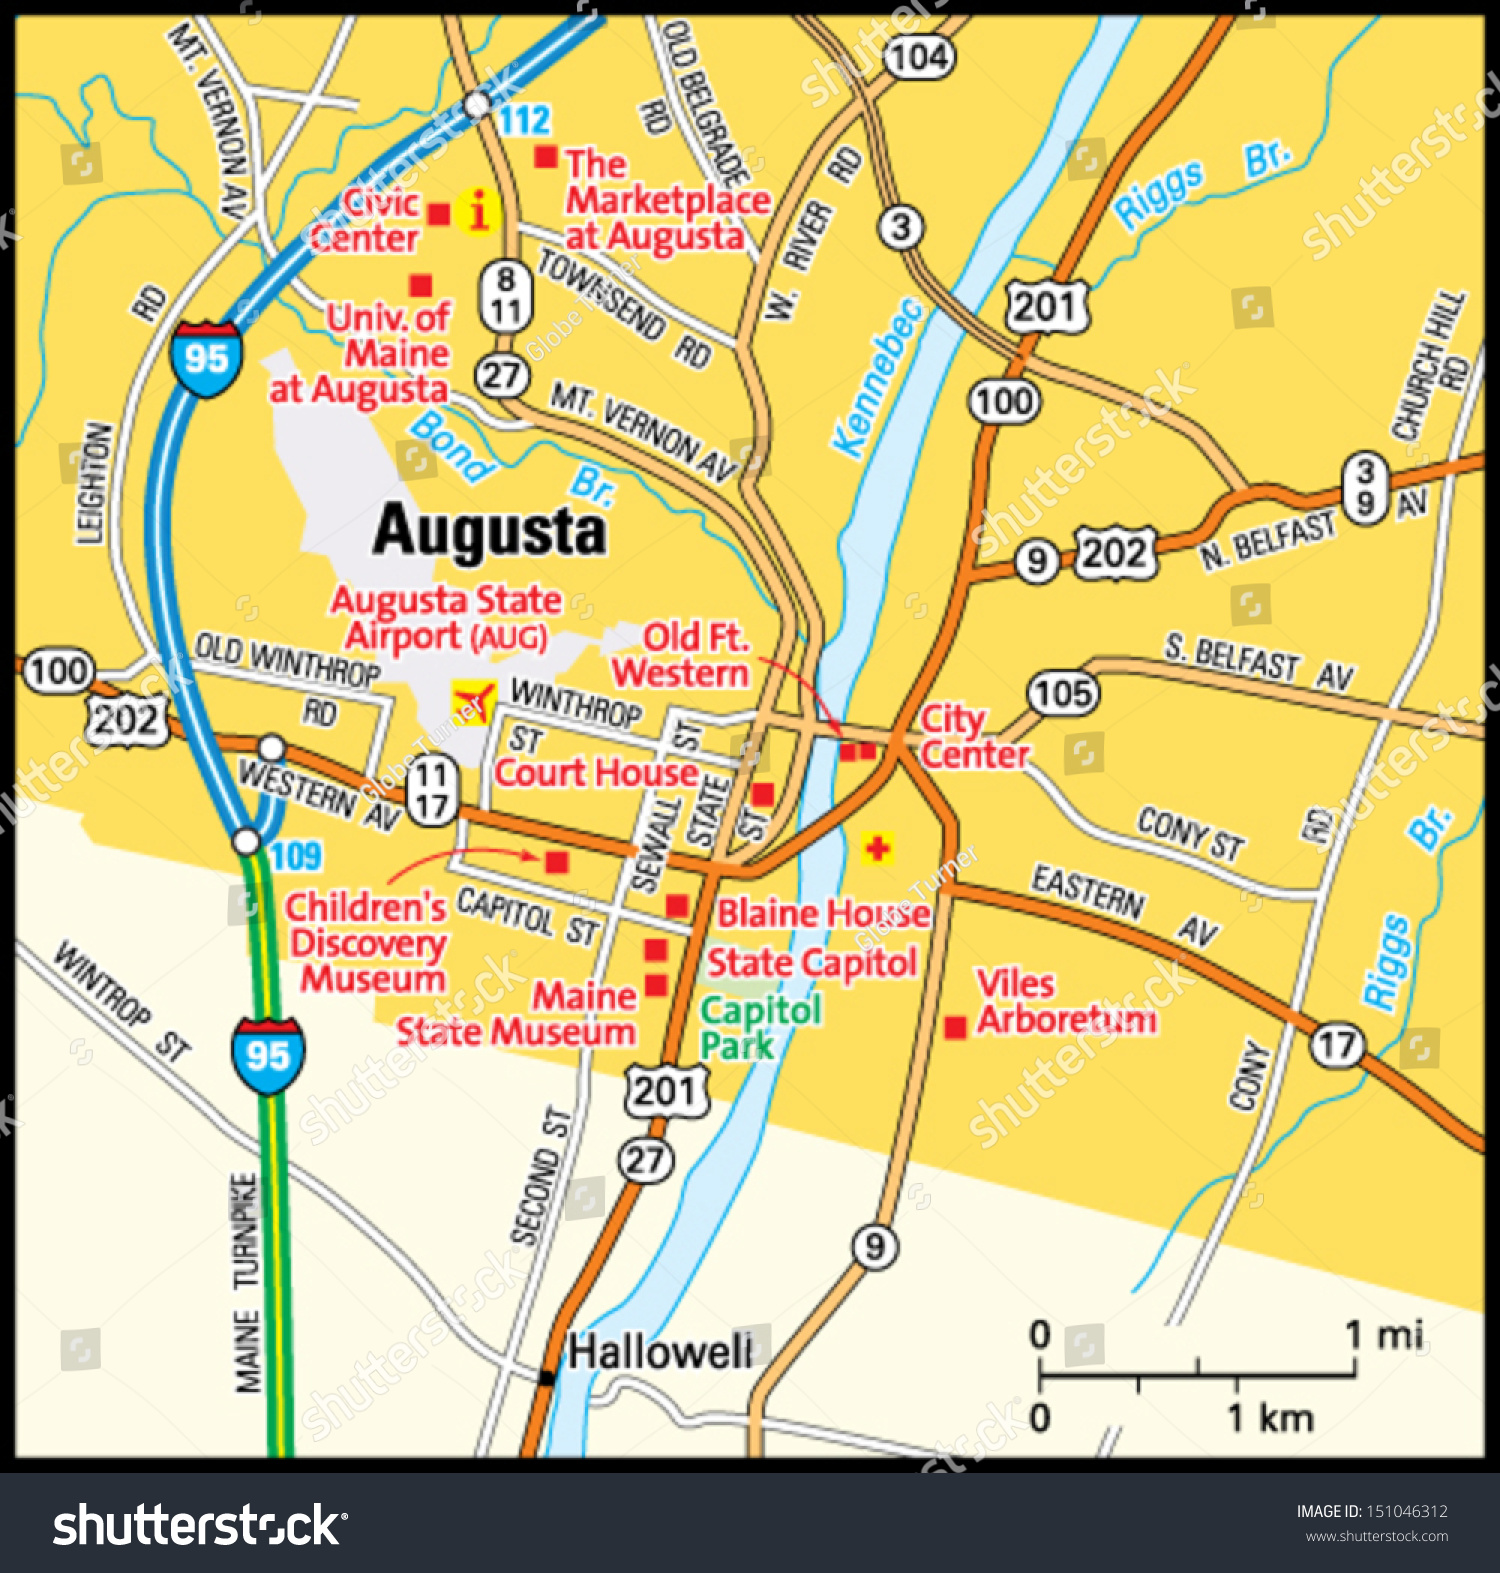 map of augusta maine Augusta Maine Area Map Stock Vector Royalty Free 151046312 map of augusta maine